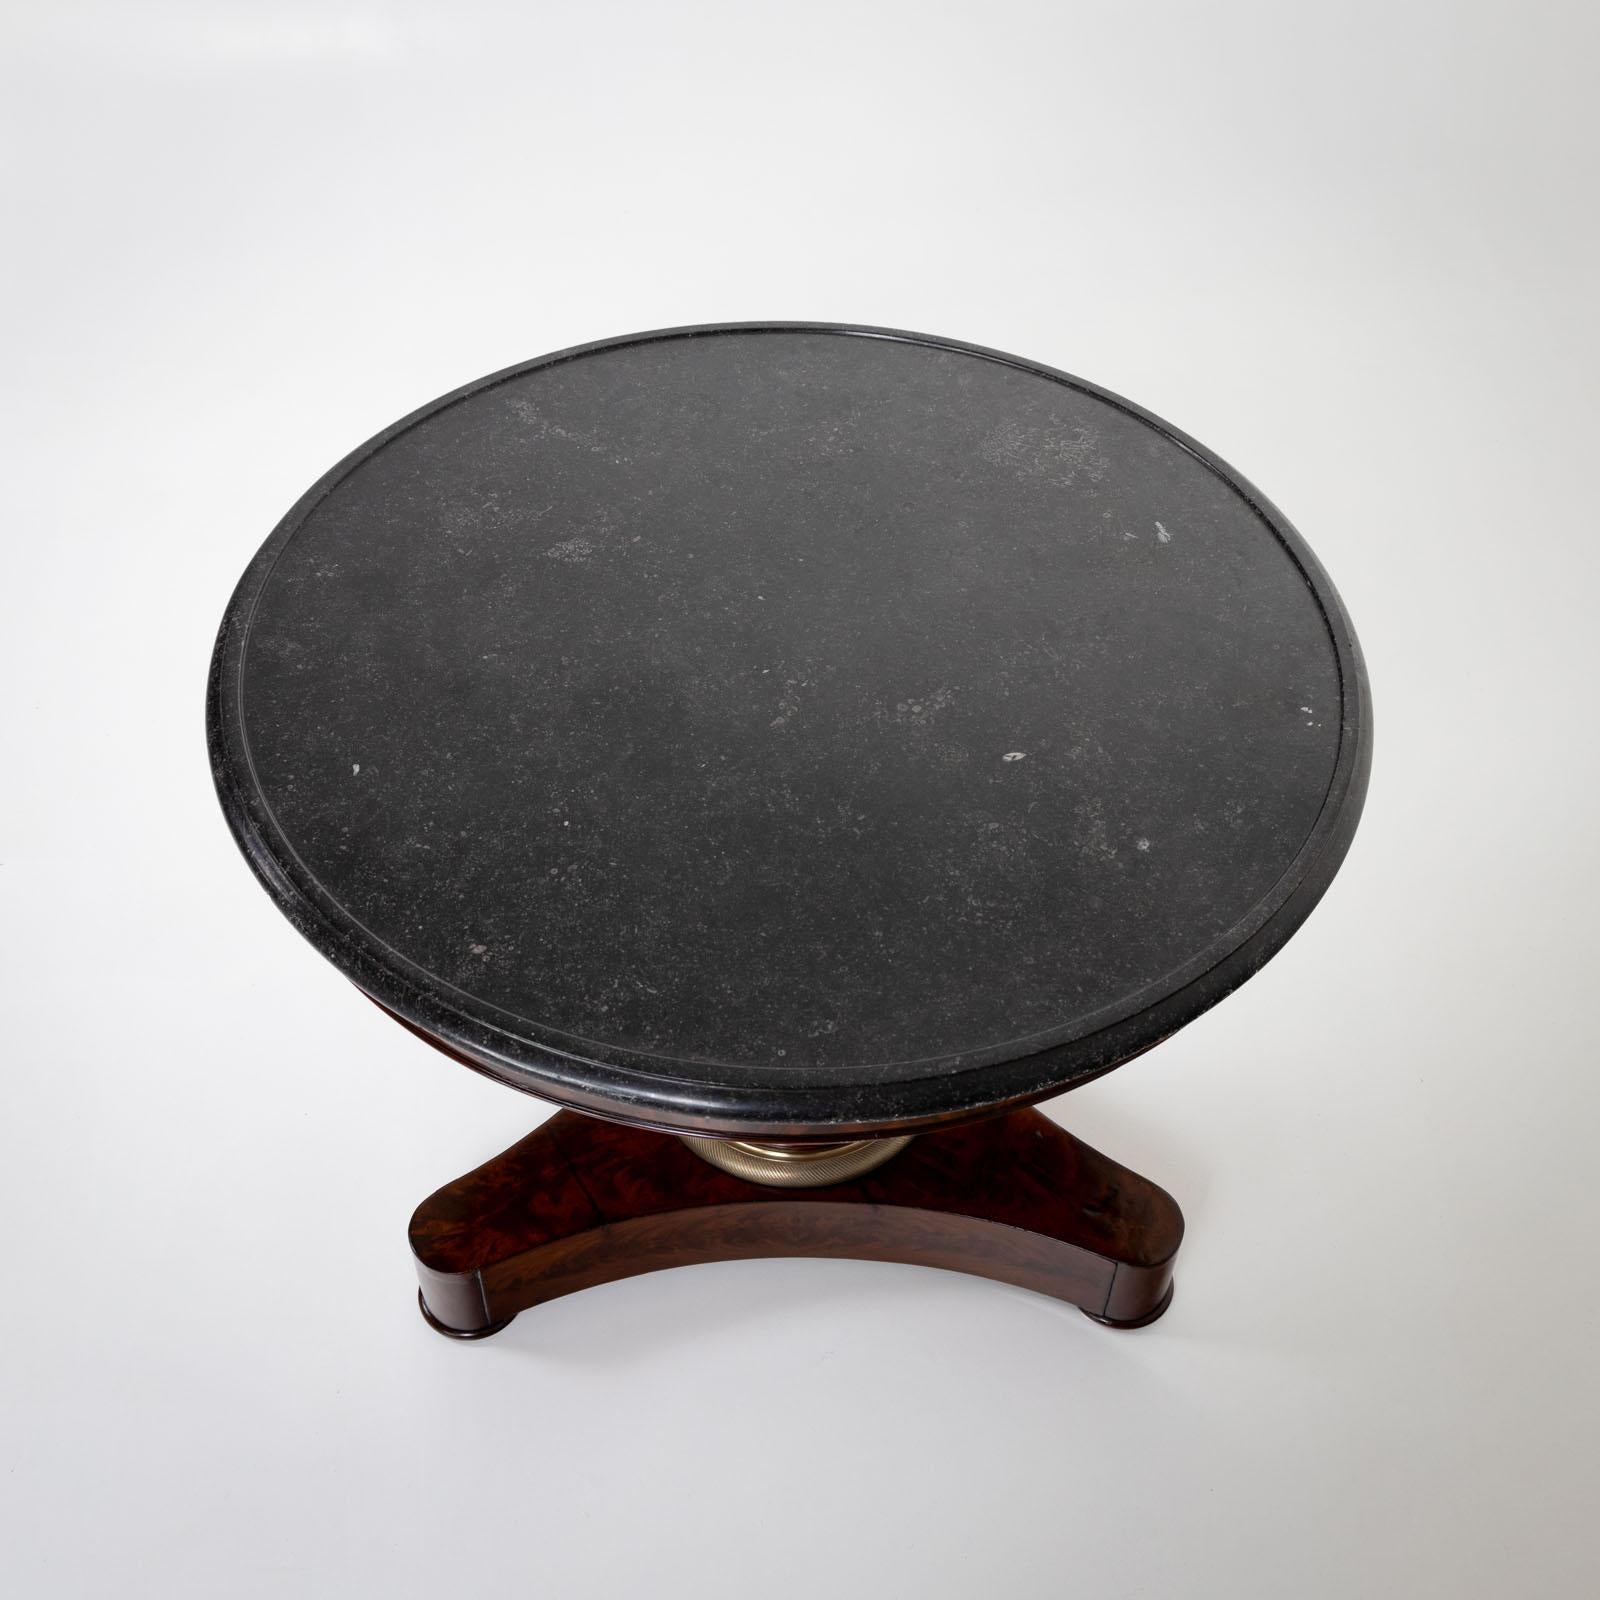 Gueridon with round table top made of gray stone and mahogany veneered, conical central column and trefoil base. A twisted brass ring surrounds the central column as a base. The table has been restored and polished by hand. 